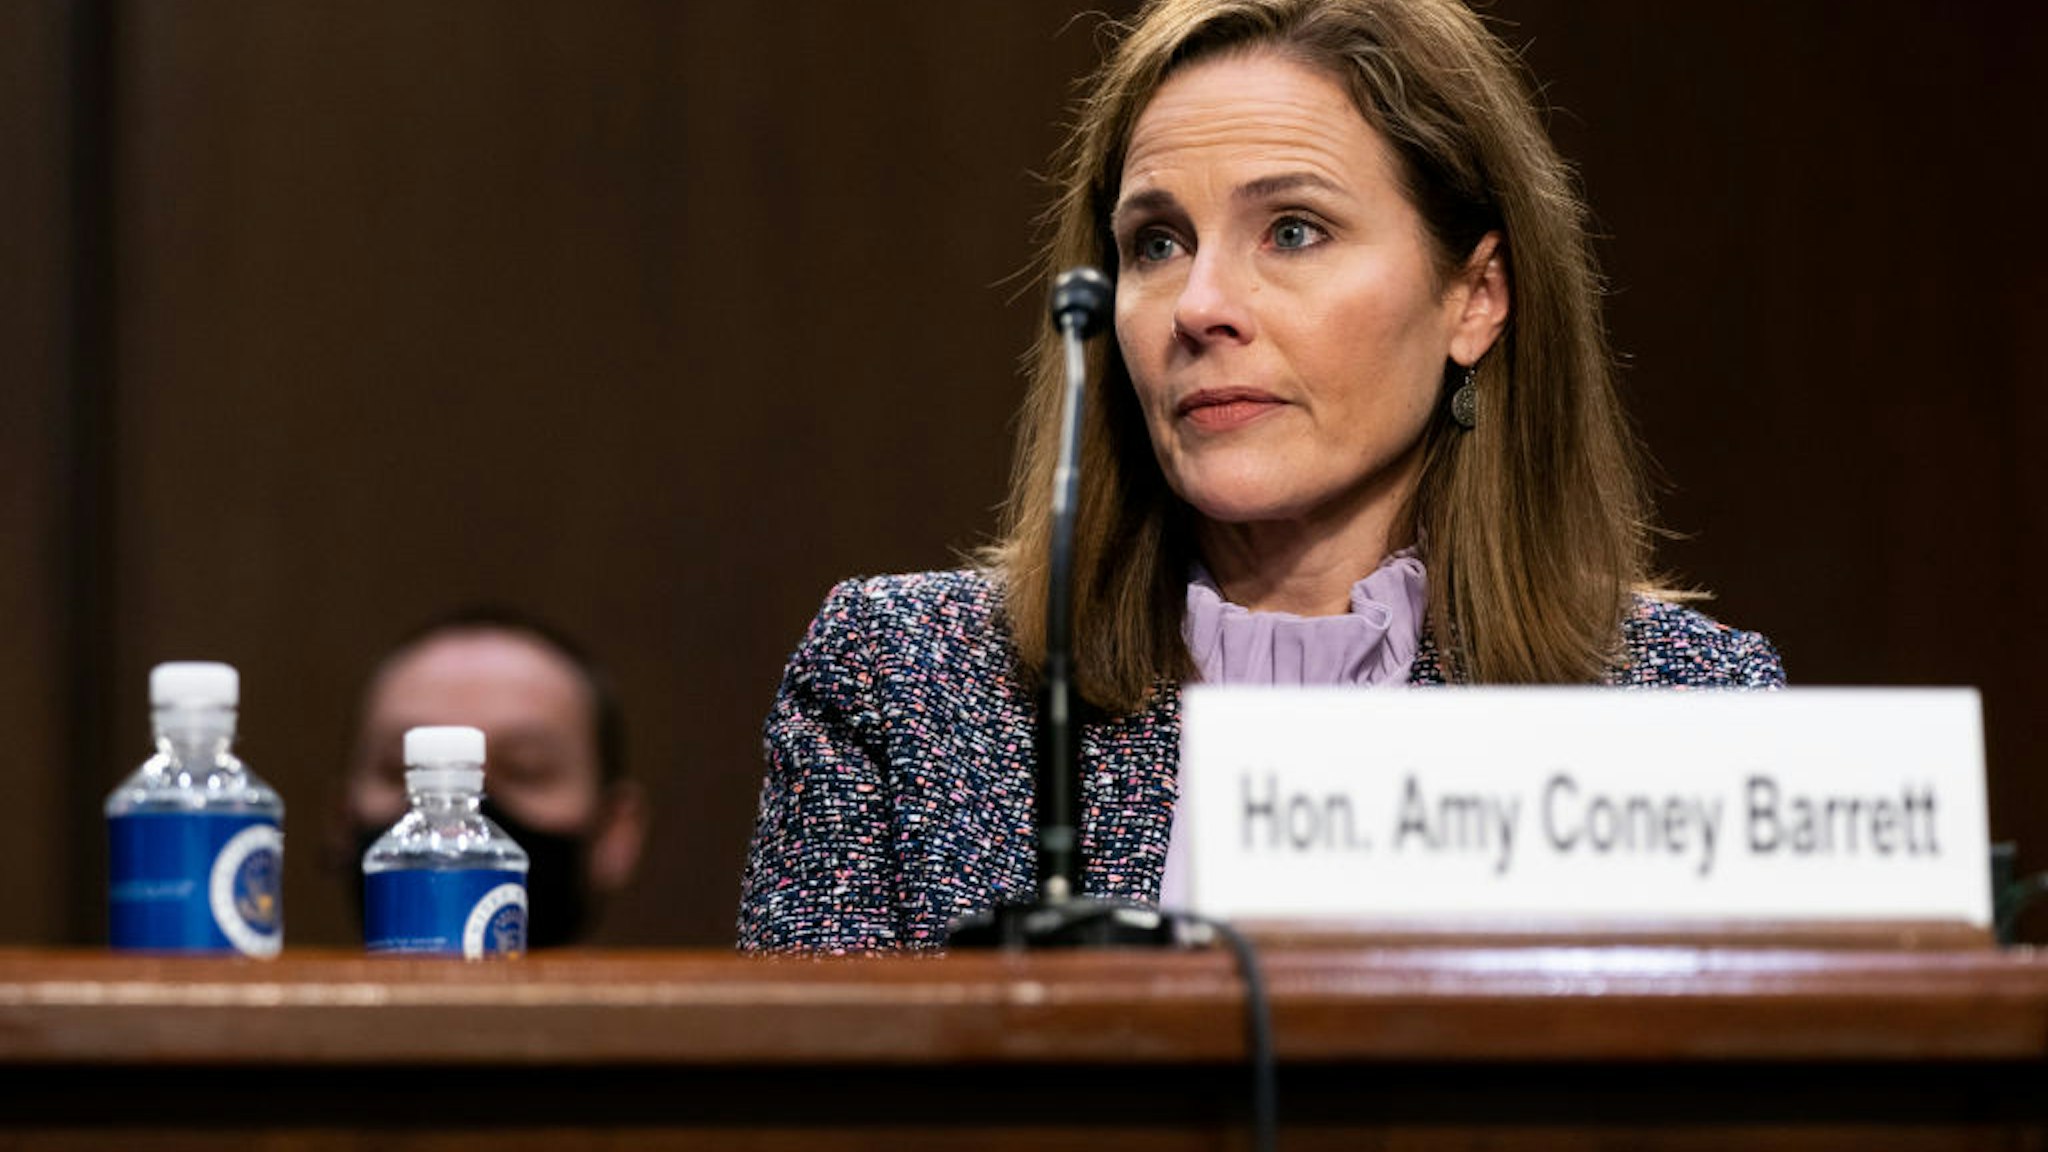 Supreme Court nominee Judge Amy Coney Barrett testifies before the Senate Judiciary Committee on the third day of her Supreme Court confirmation hearing on Capitol Hill on October 14, 2020 in Washington, DC.